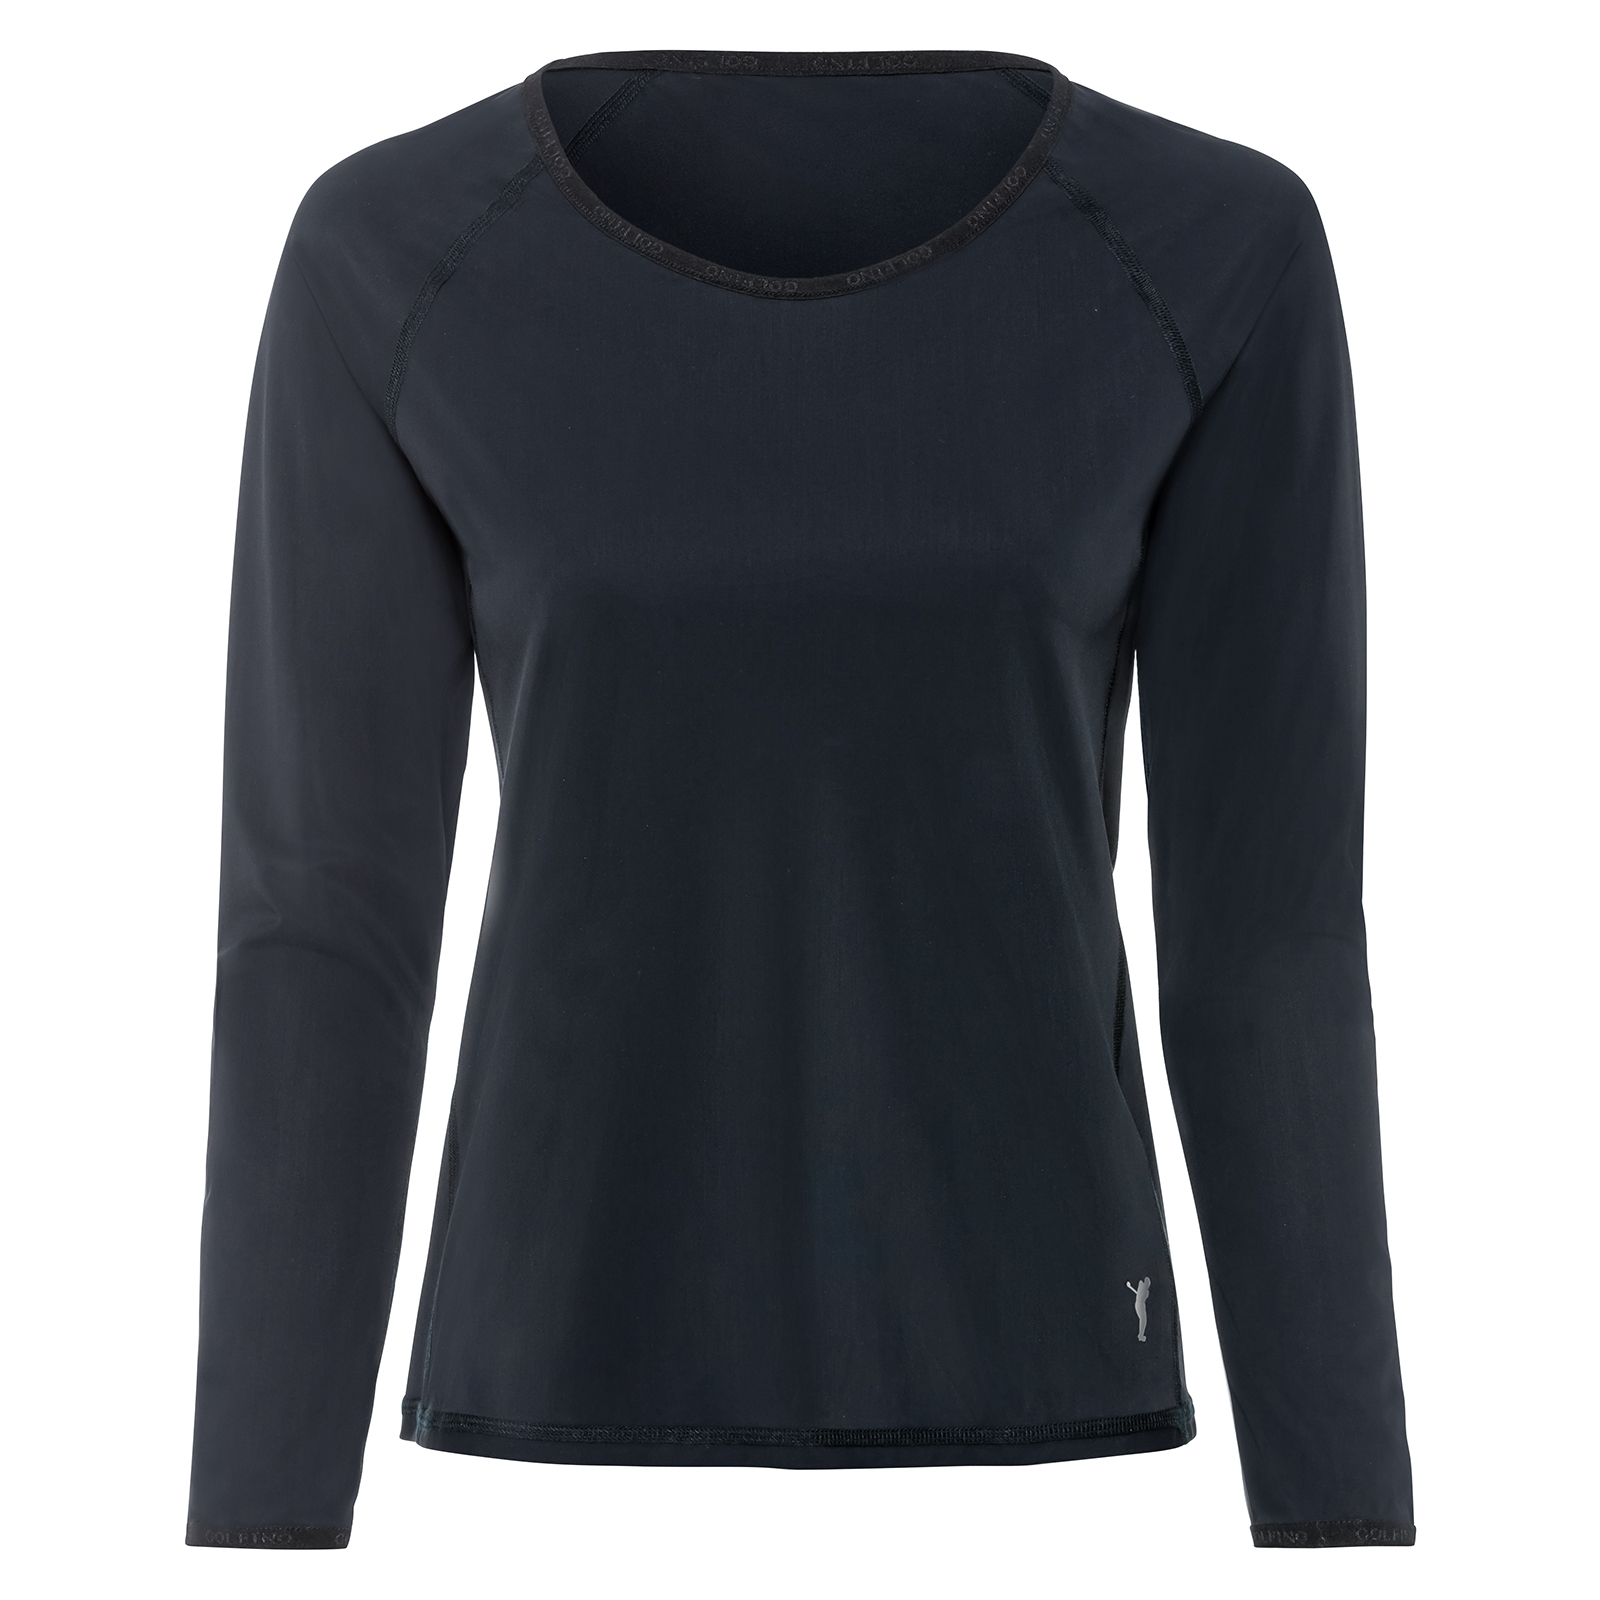 Ladies performance long sleeve shirt from innovative fabric